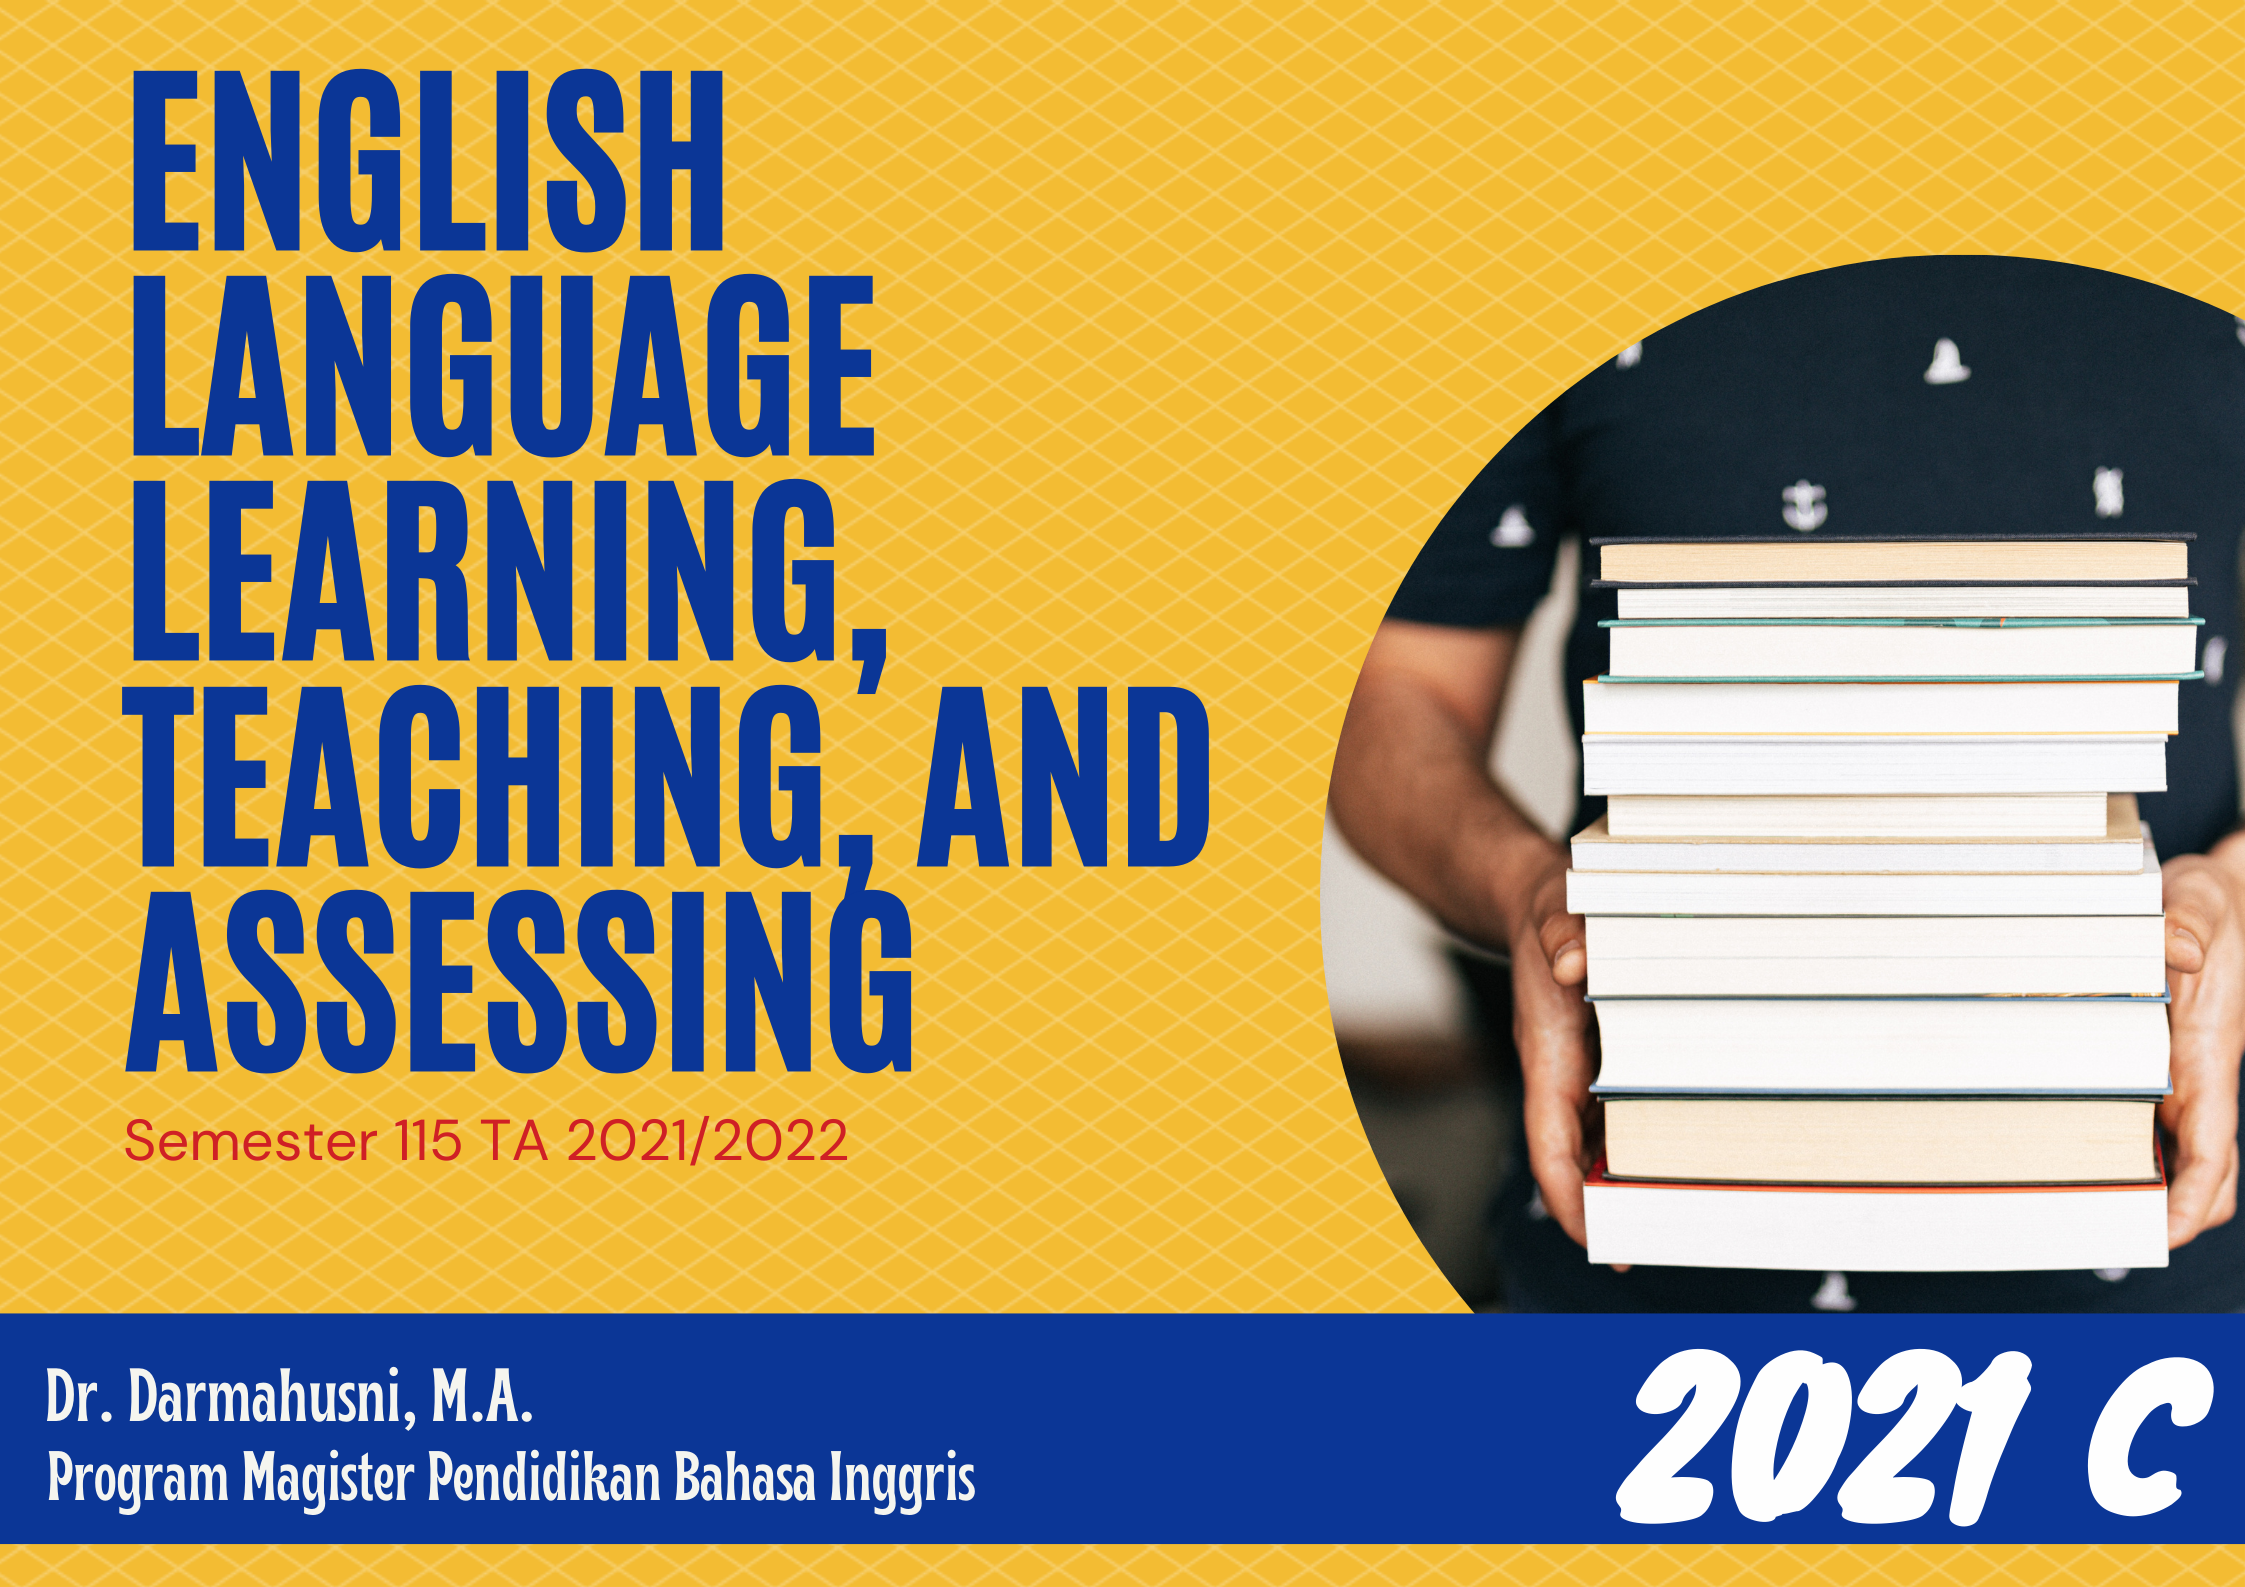 English Language Learning, Teaching, and Assessing (2021 C)